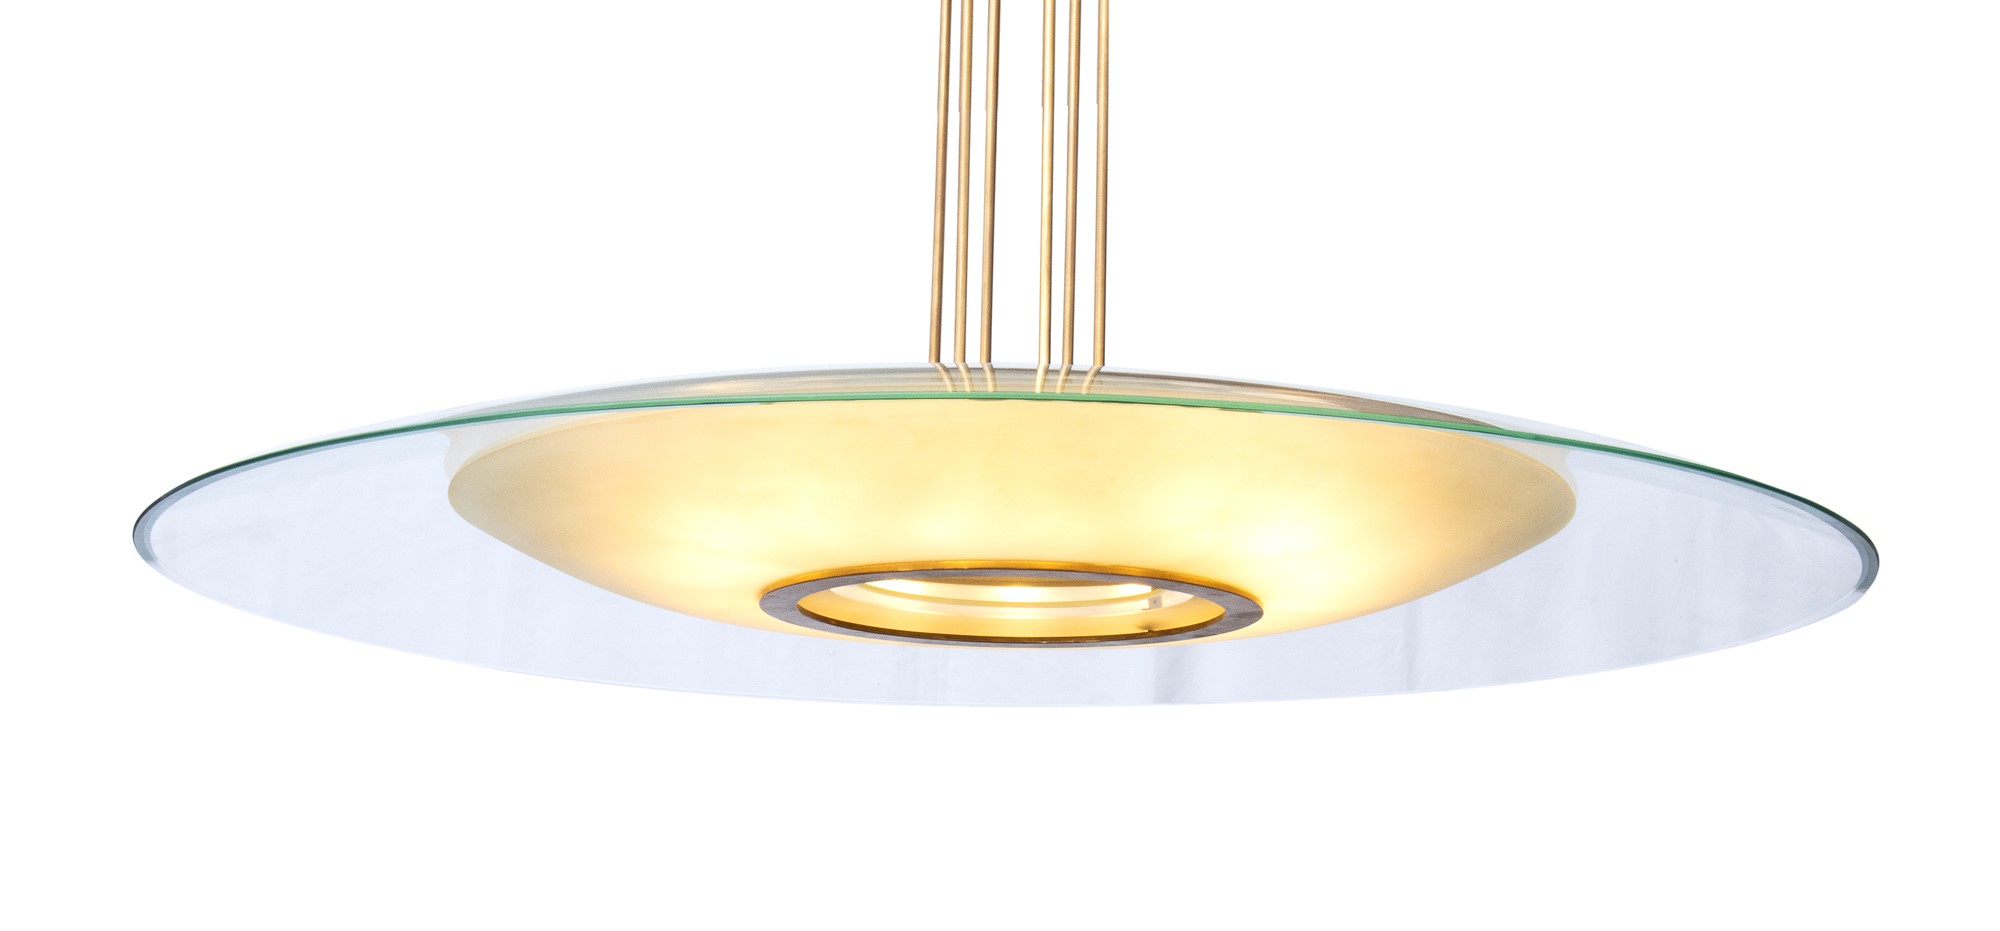 Max Ingrand Ceiling lamp mod. 1498 with brass structure, satin glass screen and crystal cup - Image 10 of 19